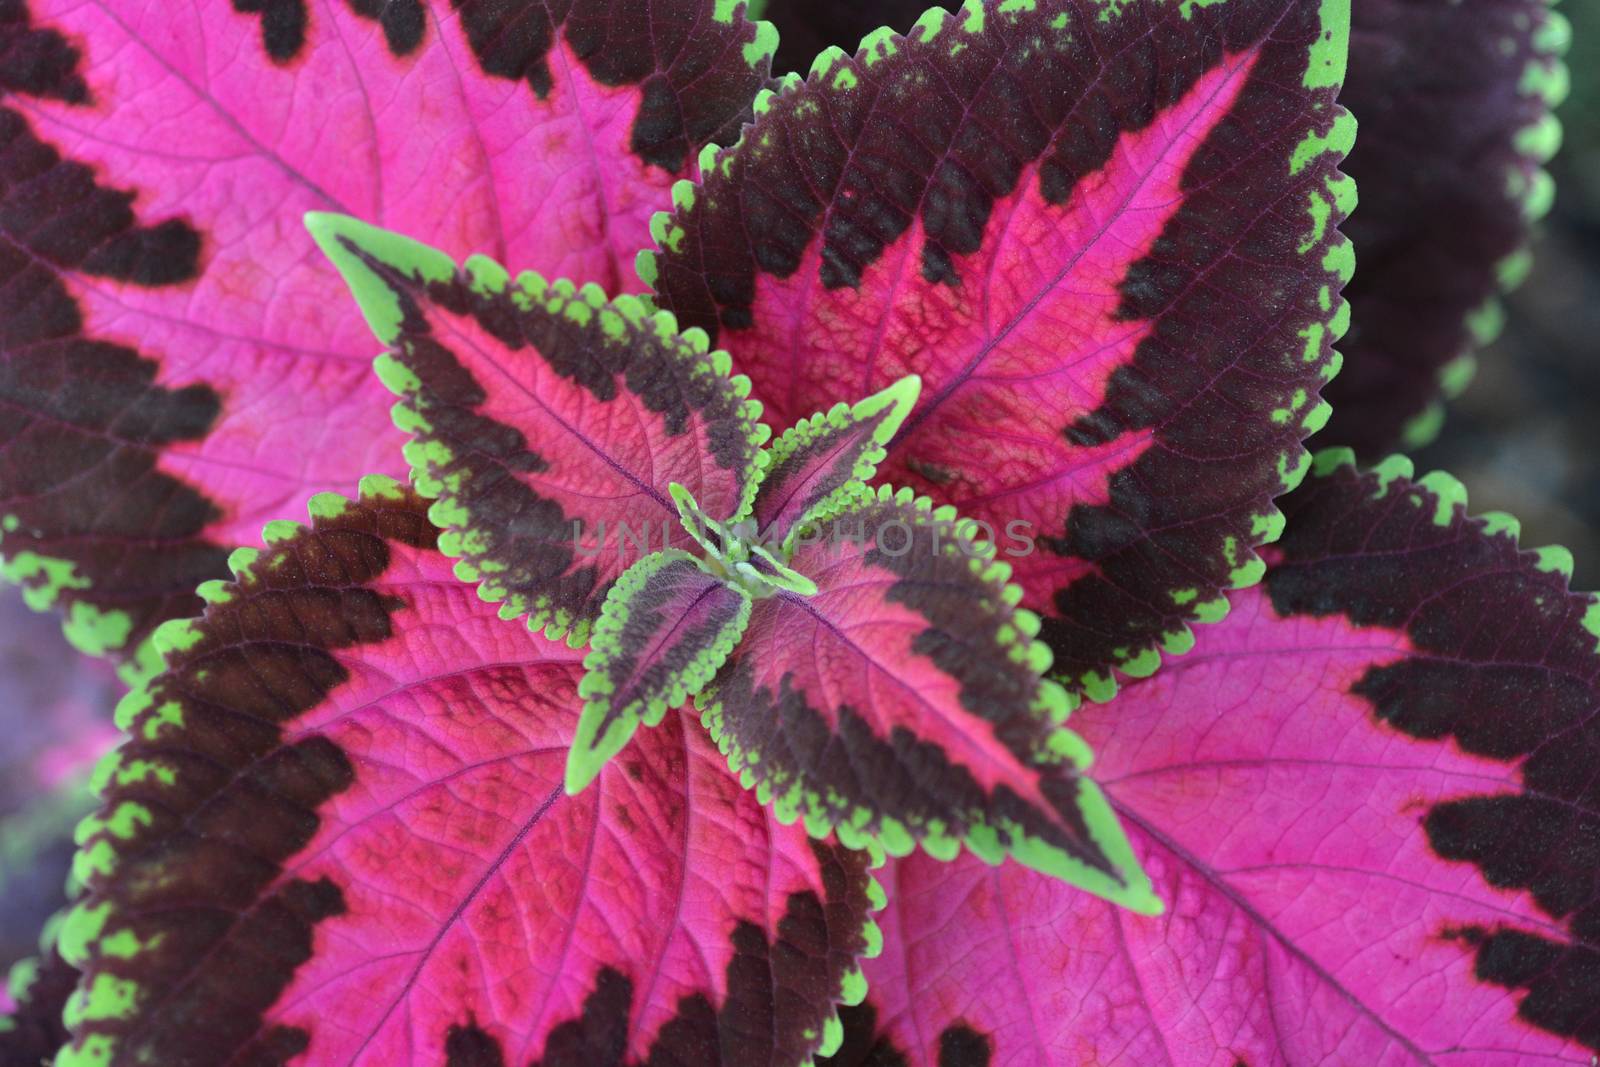 Painted nettle by nahhan